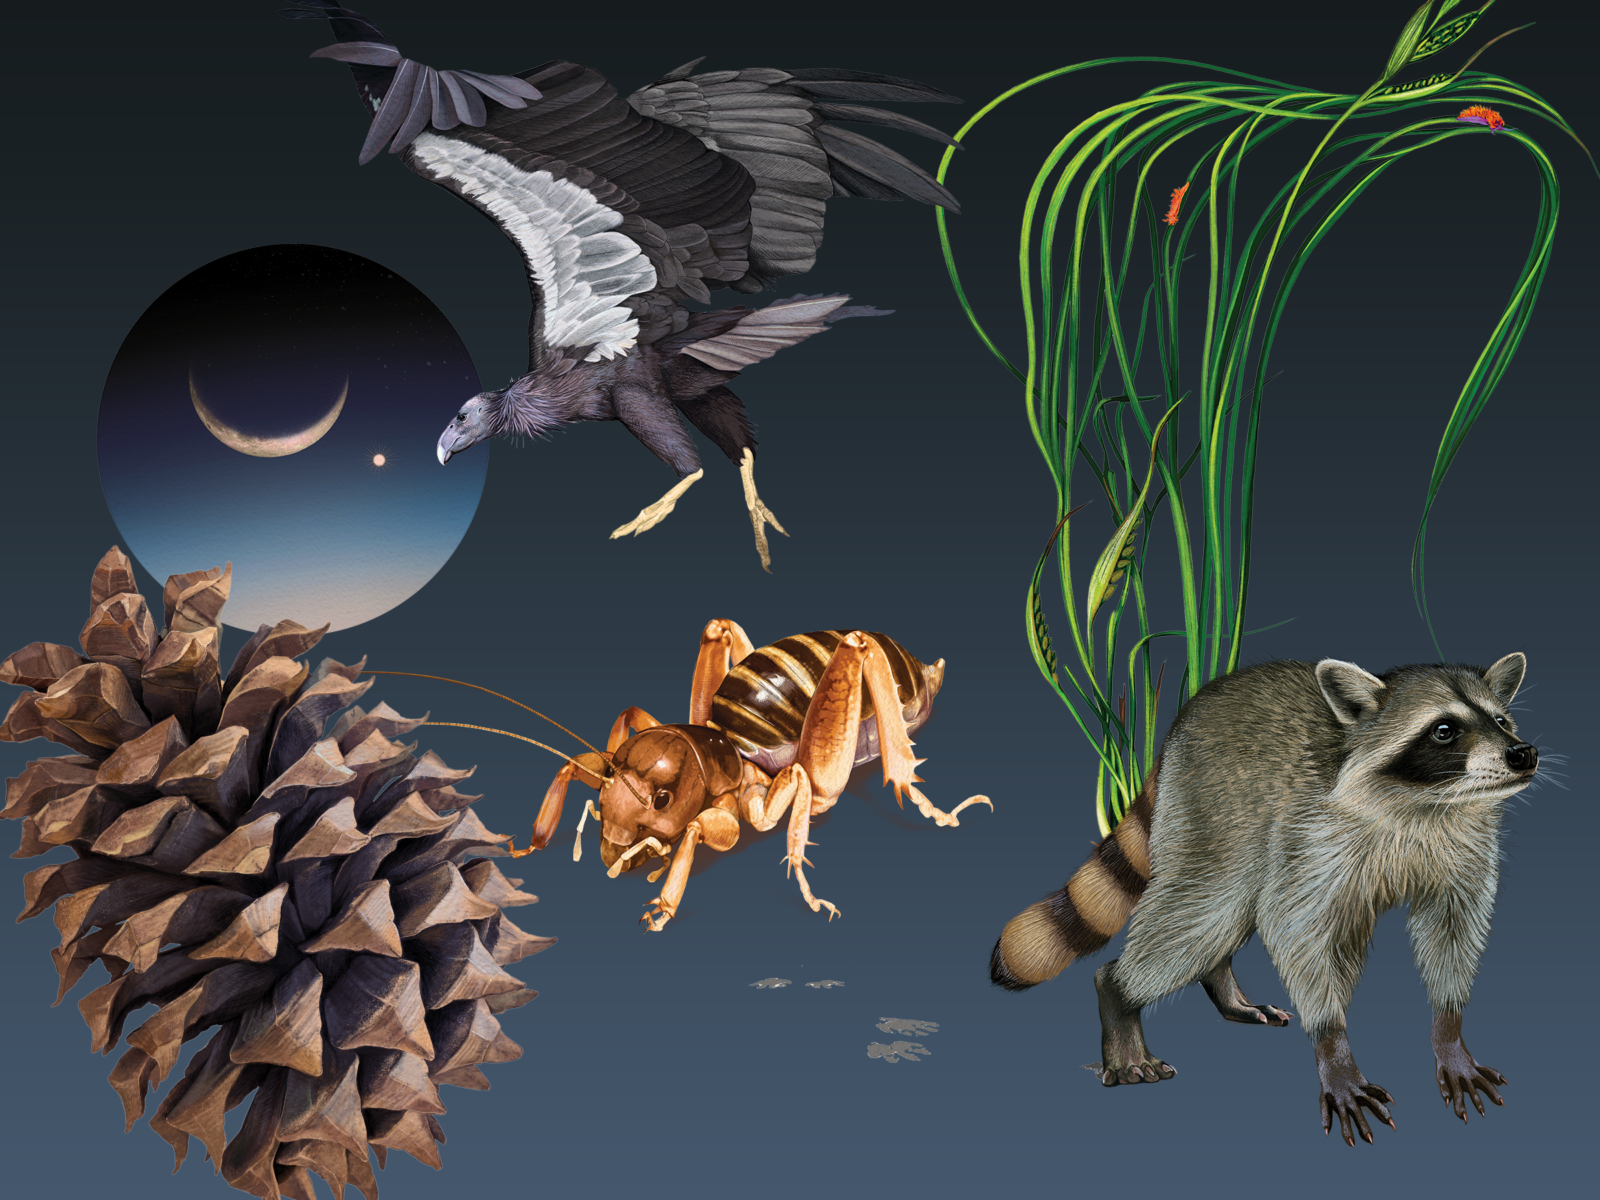 Bay Nature's Fall 2023 Almanac includes potato bugs, raccoons, pinecones and the night sky.